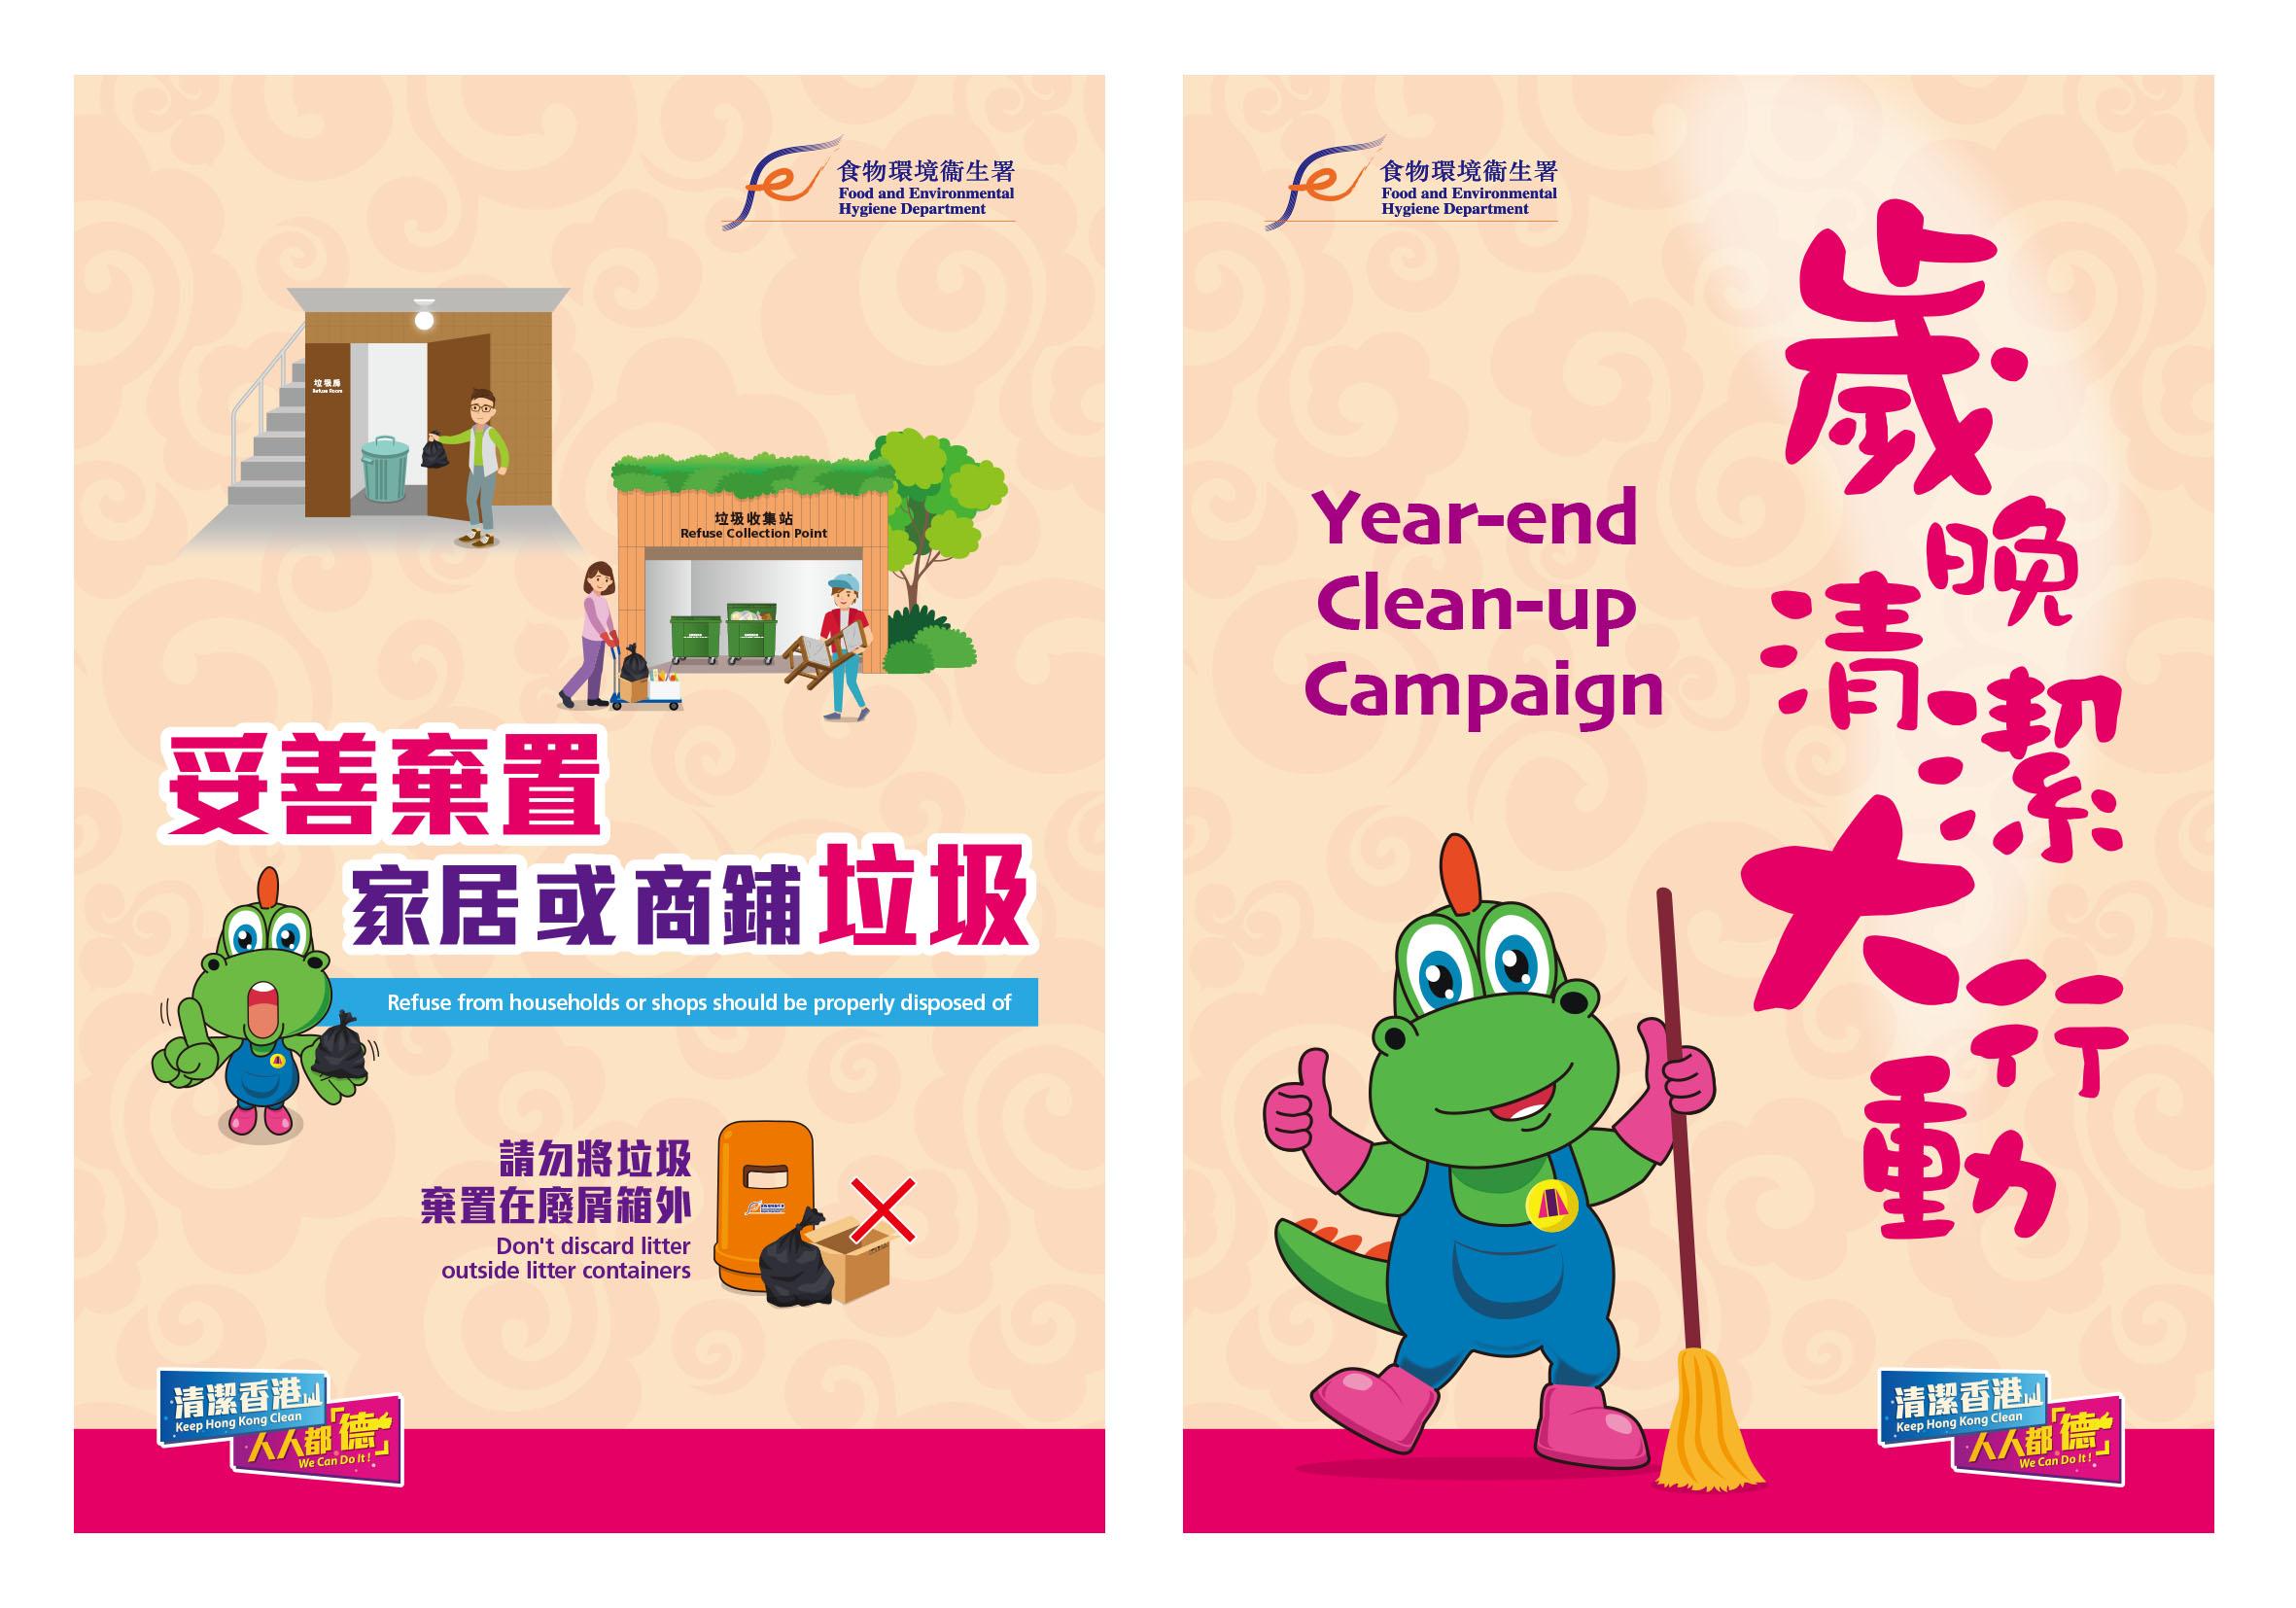 The Food and Environmental Hygiene Department commenced a territory-wide year-end clean-up campaign today (December 28), which will last for 21 days. Photo shows posters for the campaign.